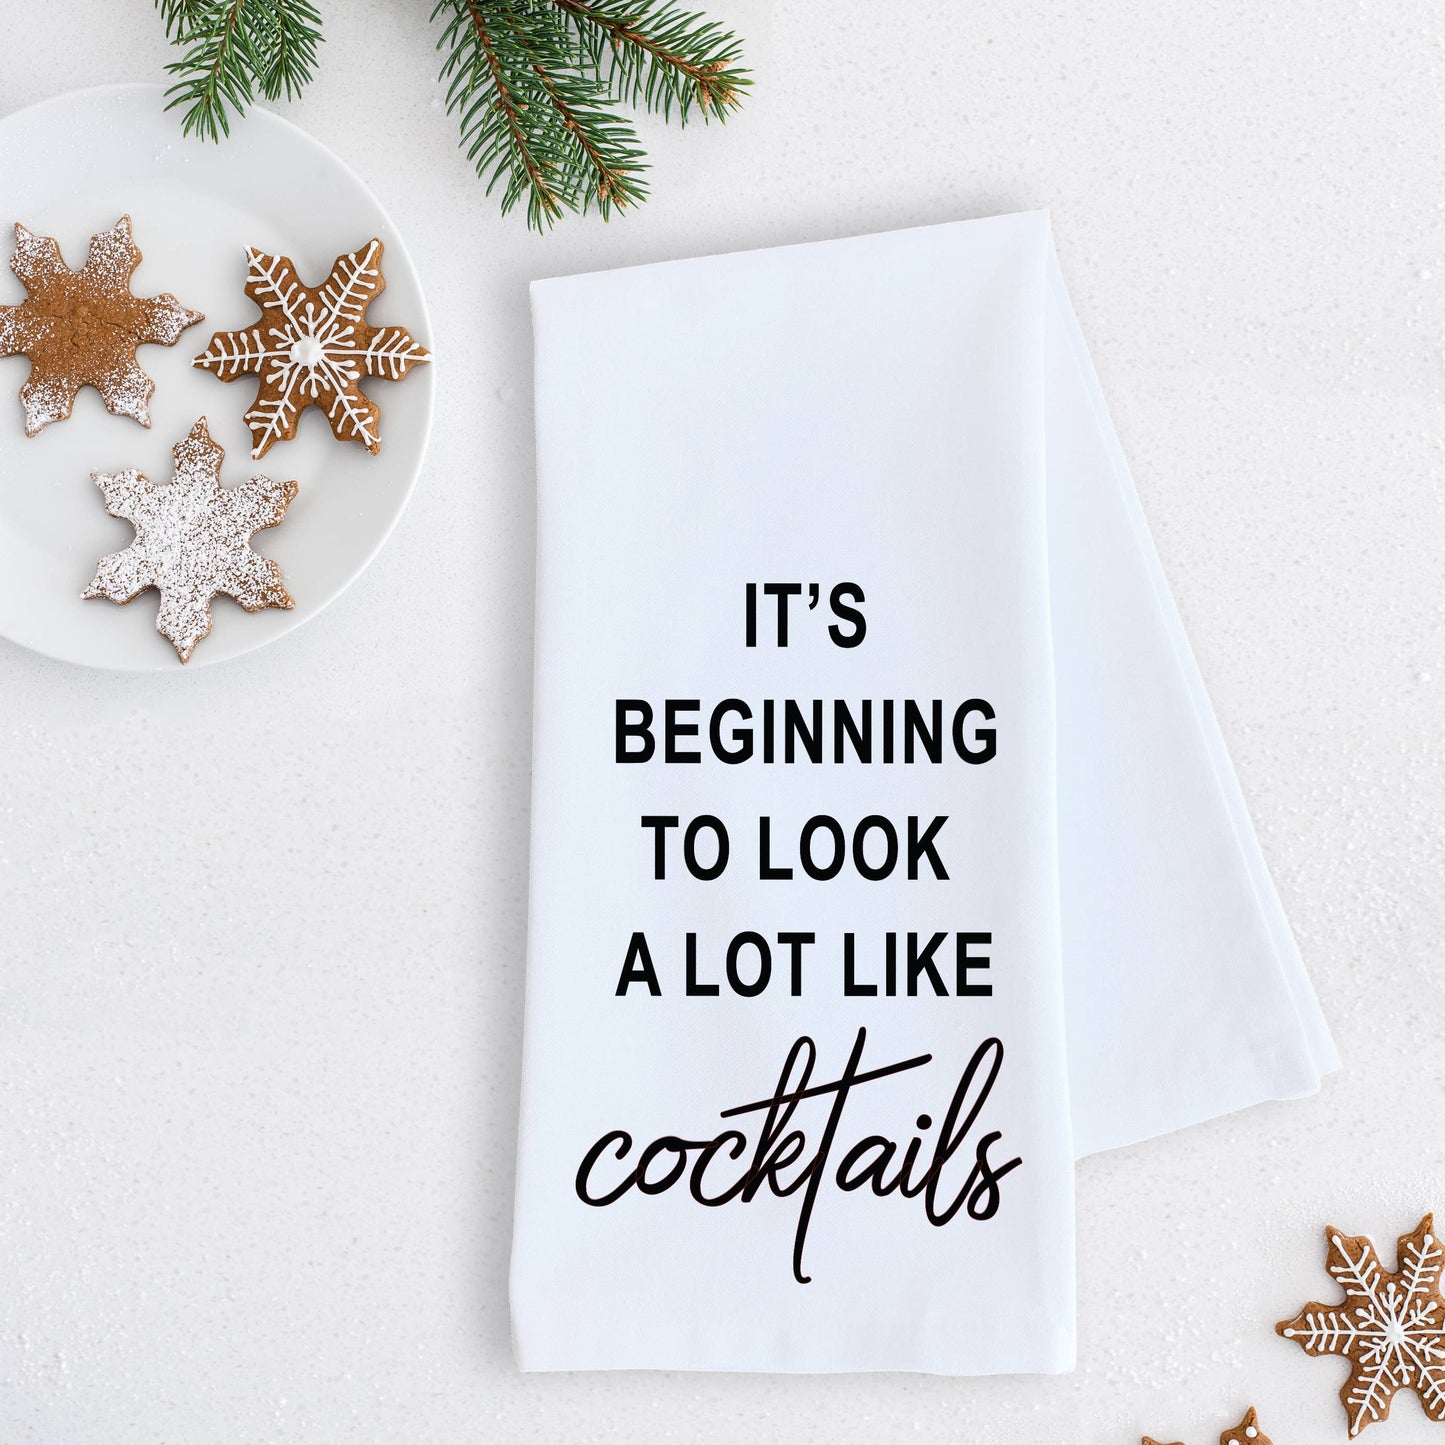 DEV D + CO. - It's Beginning To Look... Cocktails - Tea Towel - Holiday